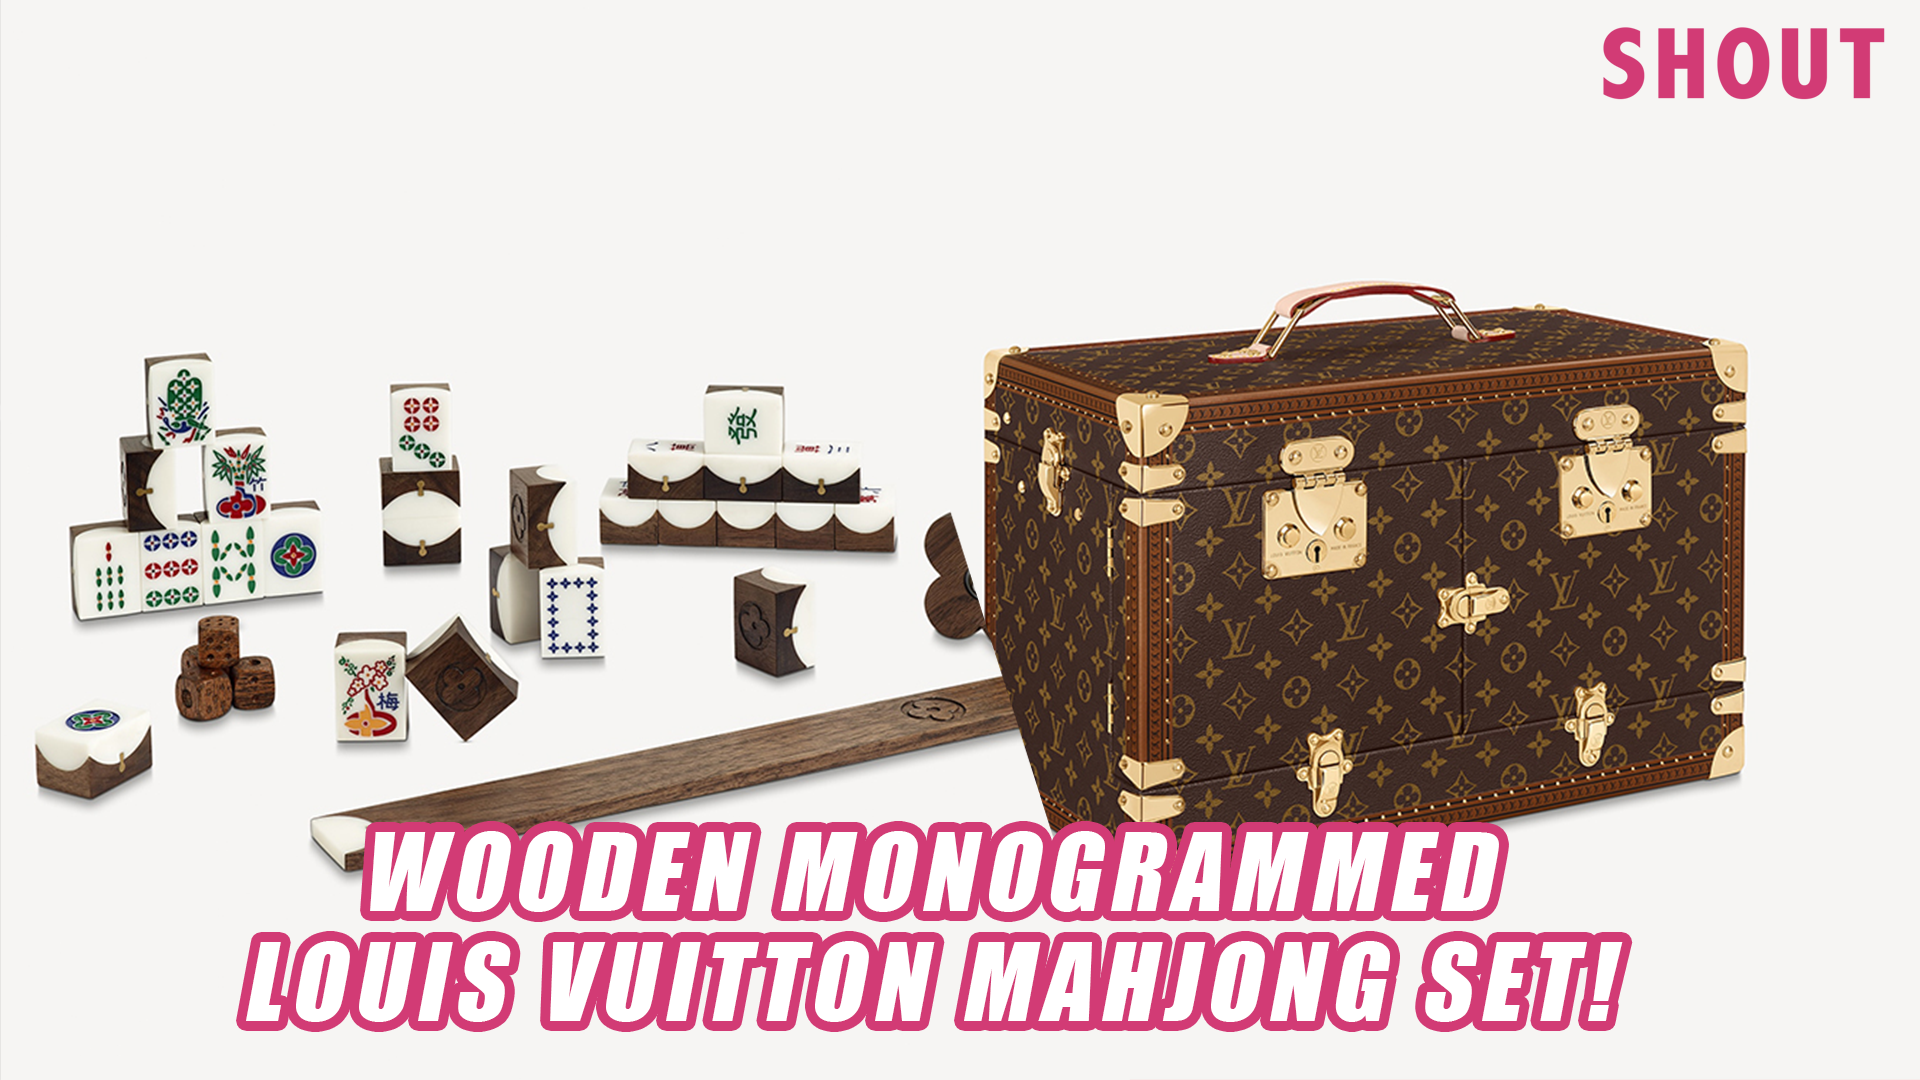 Hand-carved wood & stone mahjong set by Louis Vuitton selling for